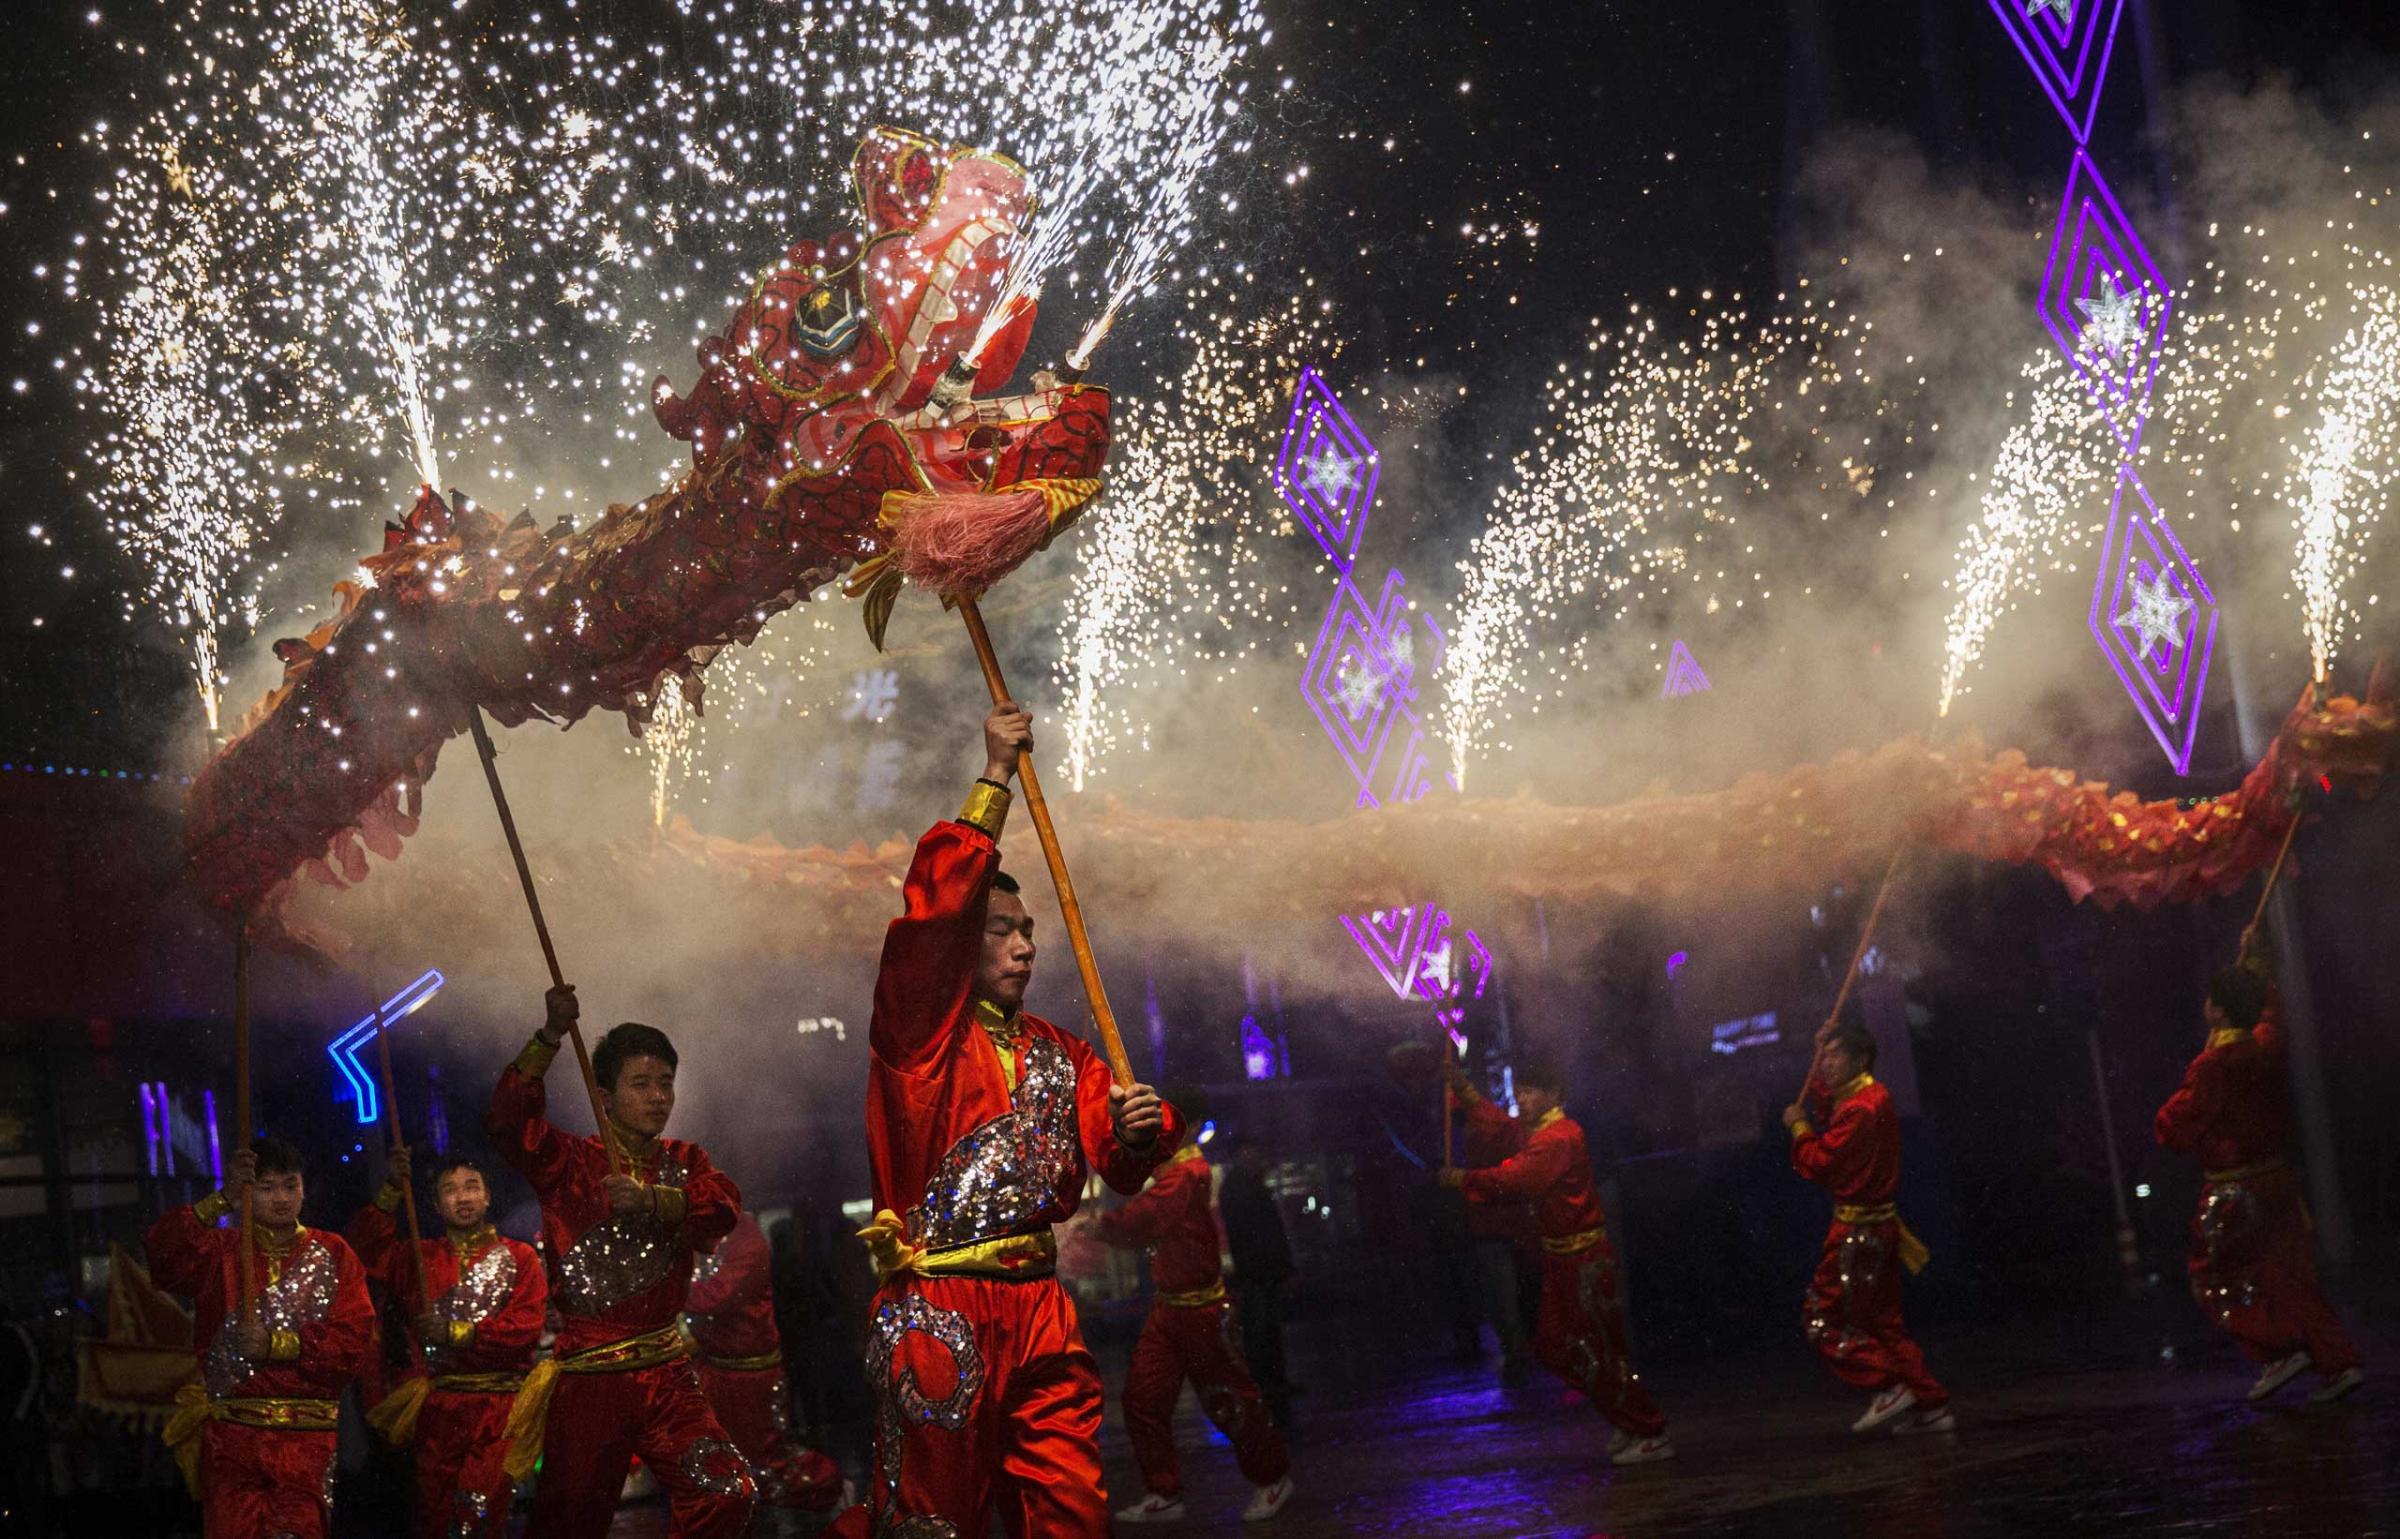 Chinese artists perform a dragon dance at a local amusement park during celebrations for the Lunar New Year, Feb. 19, 2015 in Beijing.